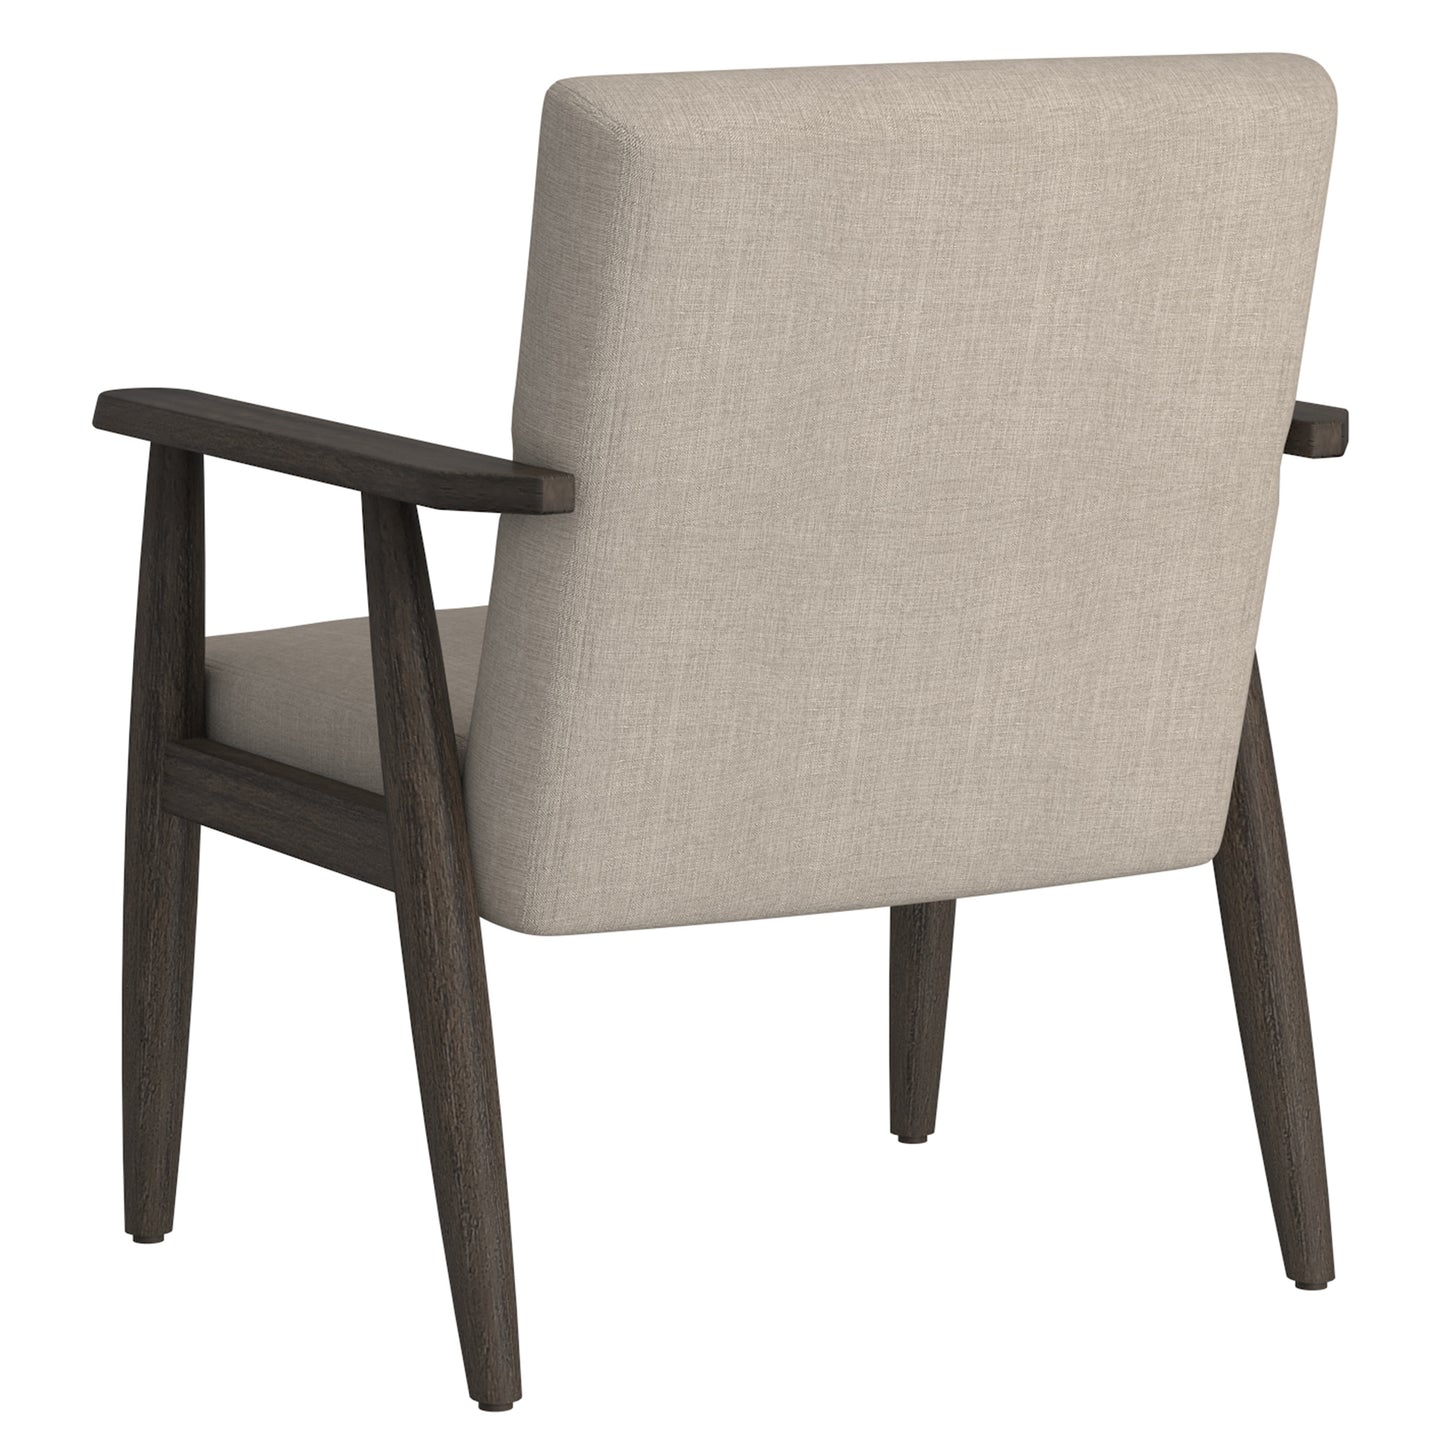 Huxly Accent Chair in Beige and Weathered Brown - WW